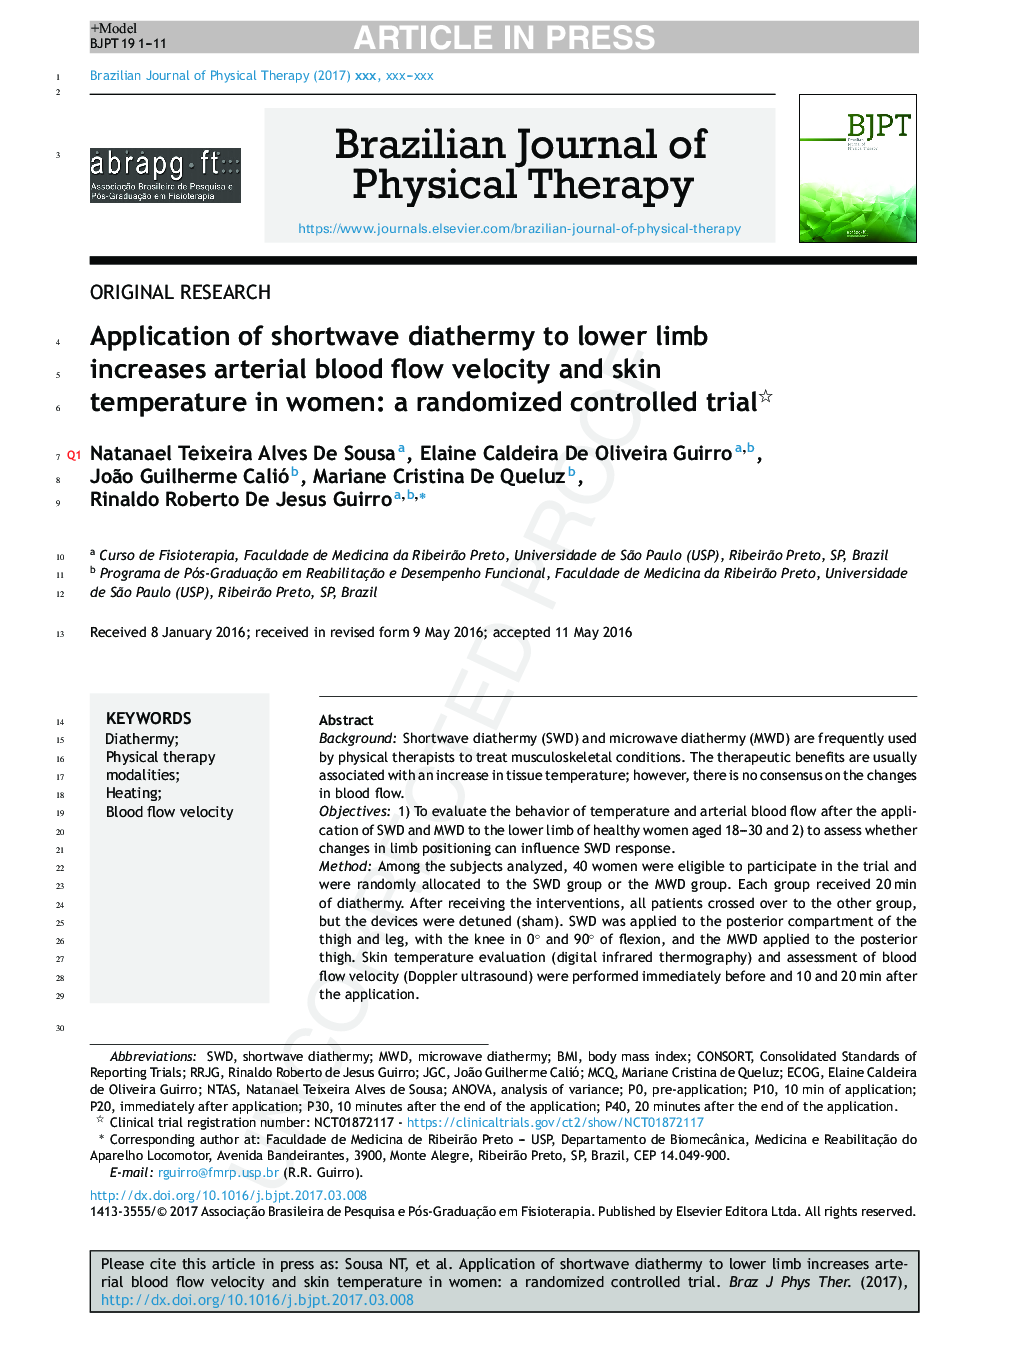 Application of shortwave diathermy to lower limb increases arterial blood flow velocity and skin temperature in women: a randomized controlled trial